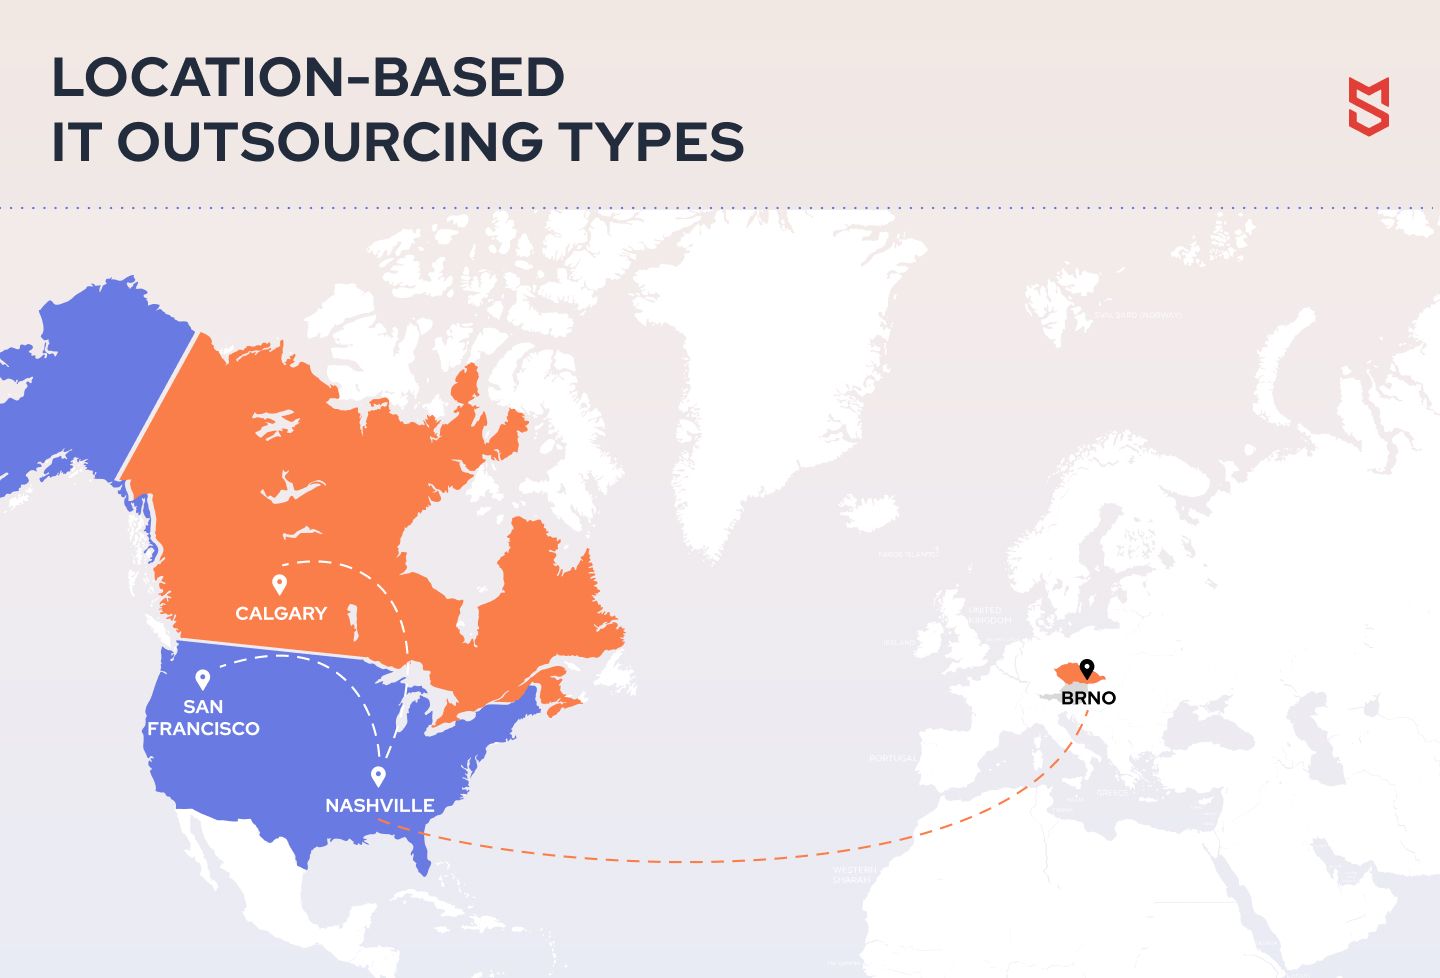 Location-based IT outsourcing types